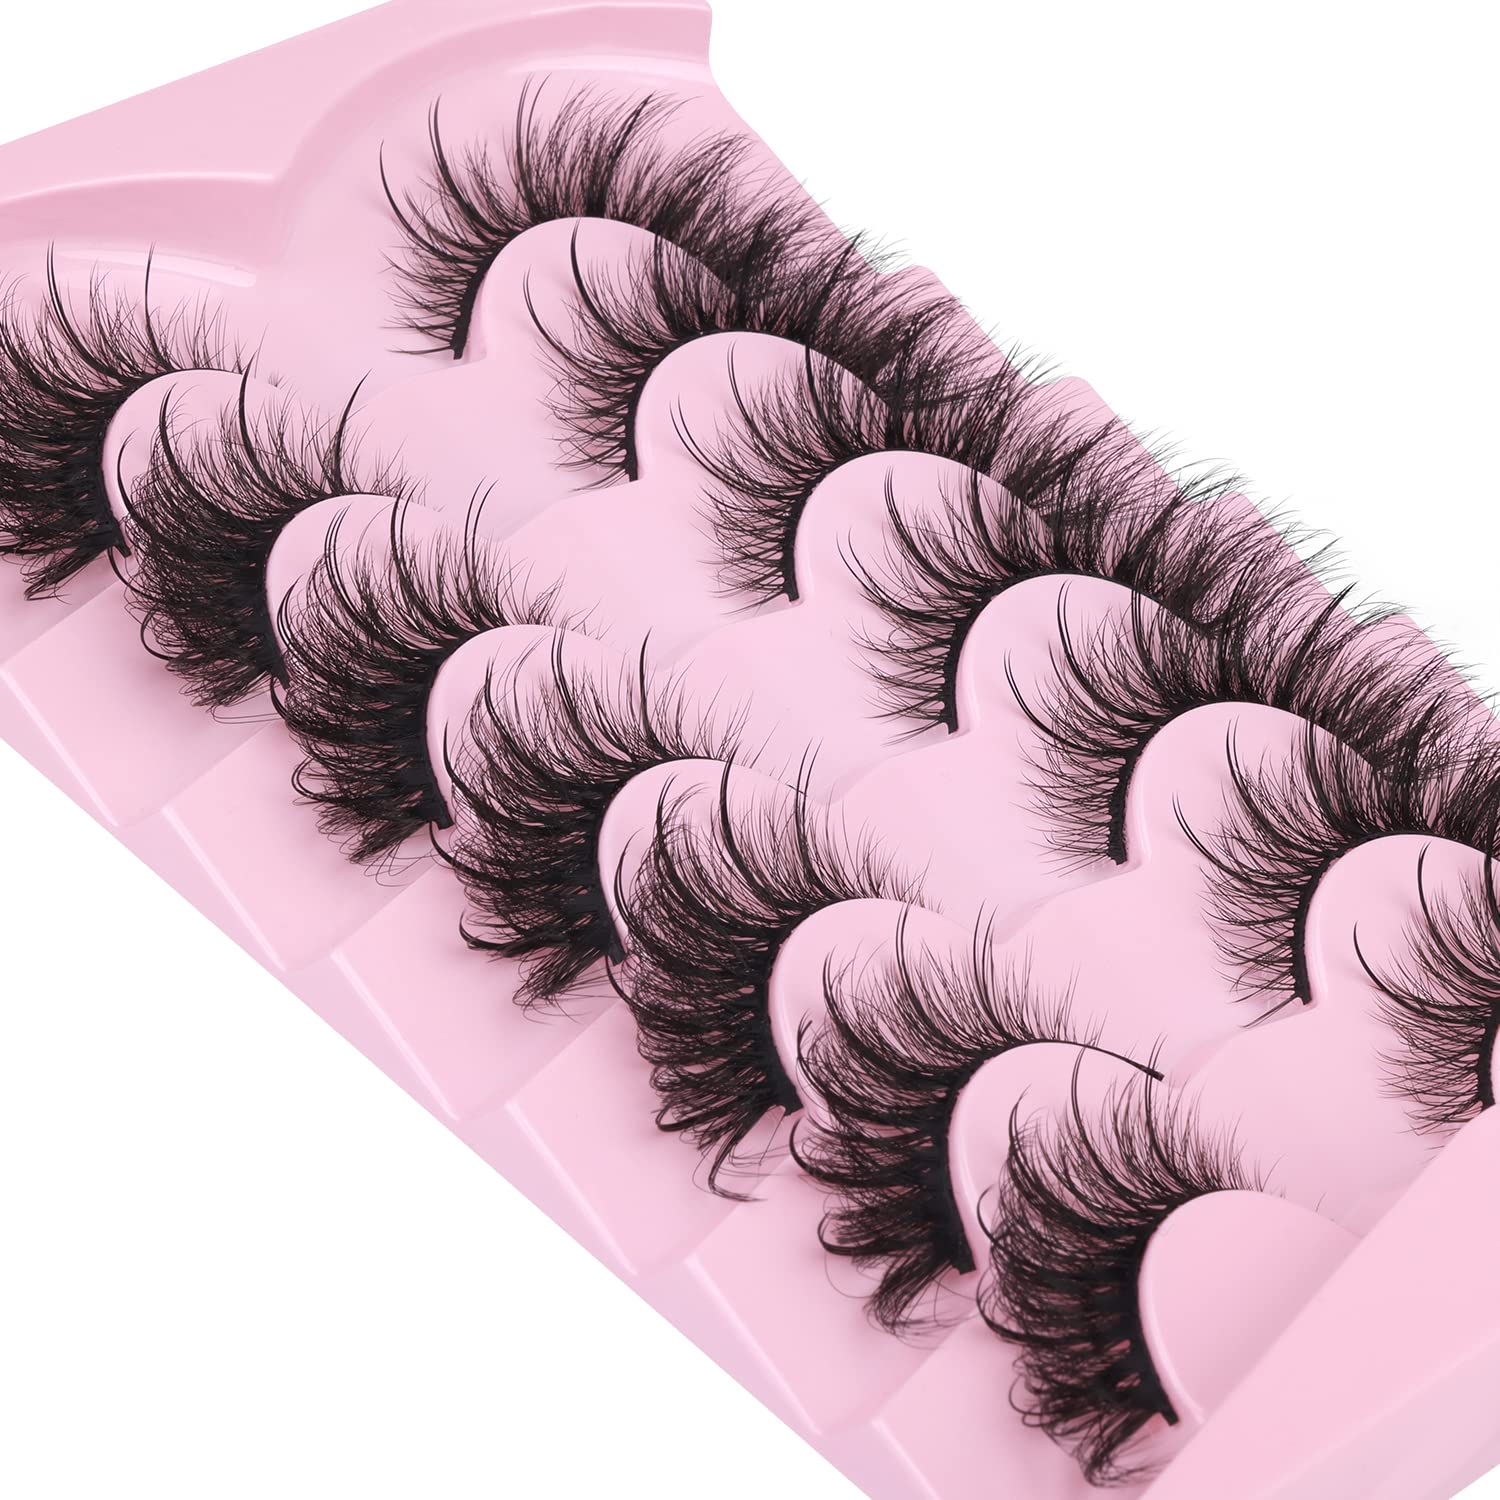 Fox Eye Lashes Wispy Faux Mink Lashes Fluffy Fairy Cat Eye Lashes That Look Like Extensions Spiky Fake Eyelashes Natural Look